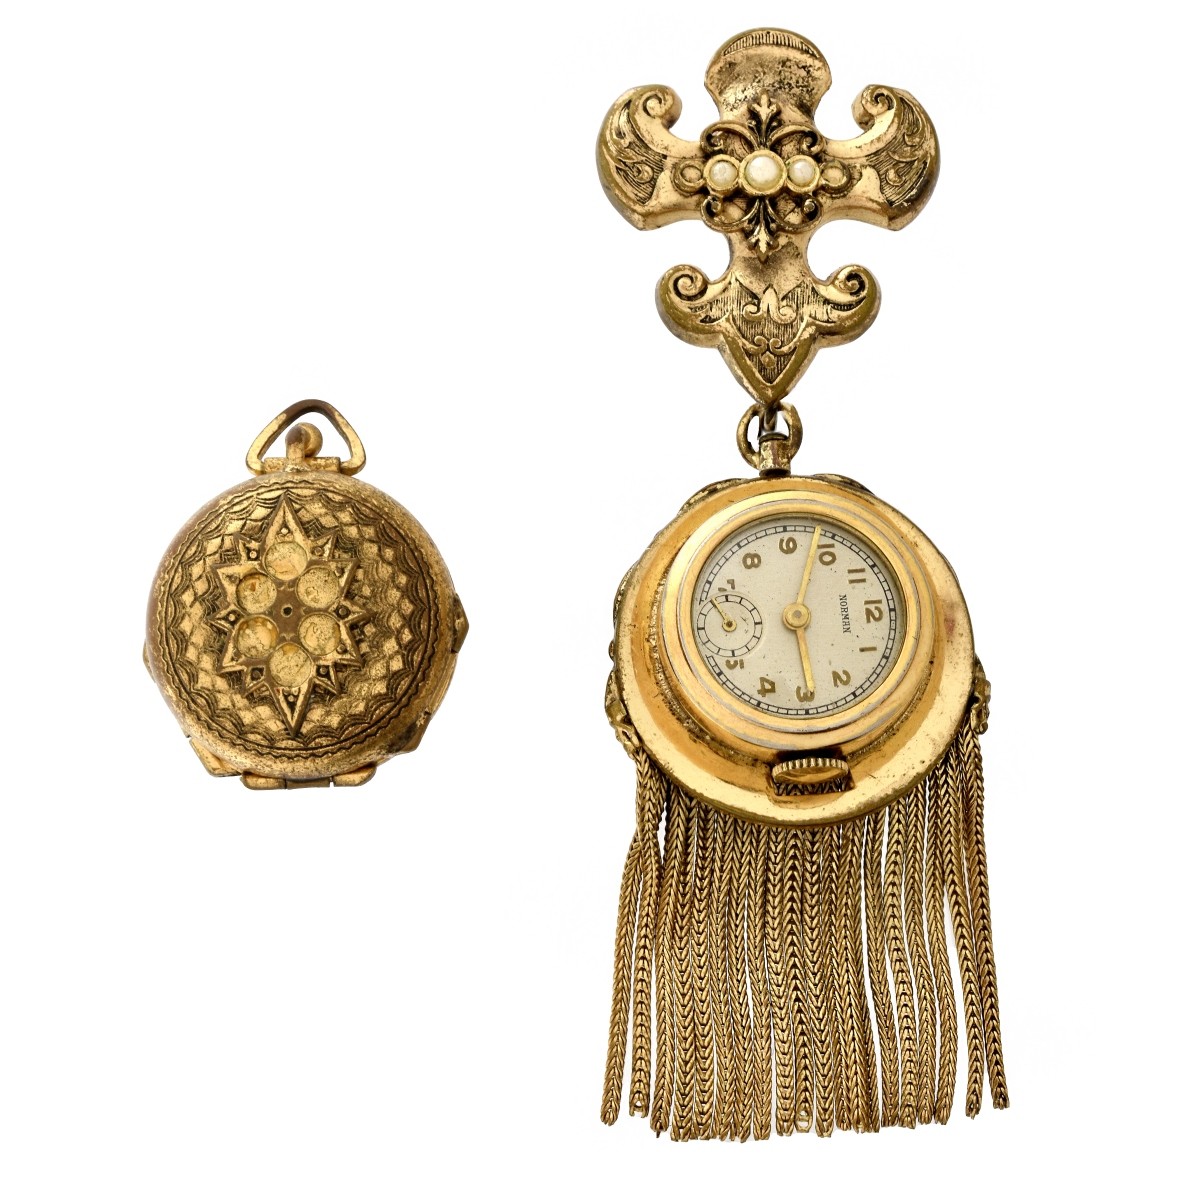 Gold Filled Locket and Watch Brooch